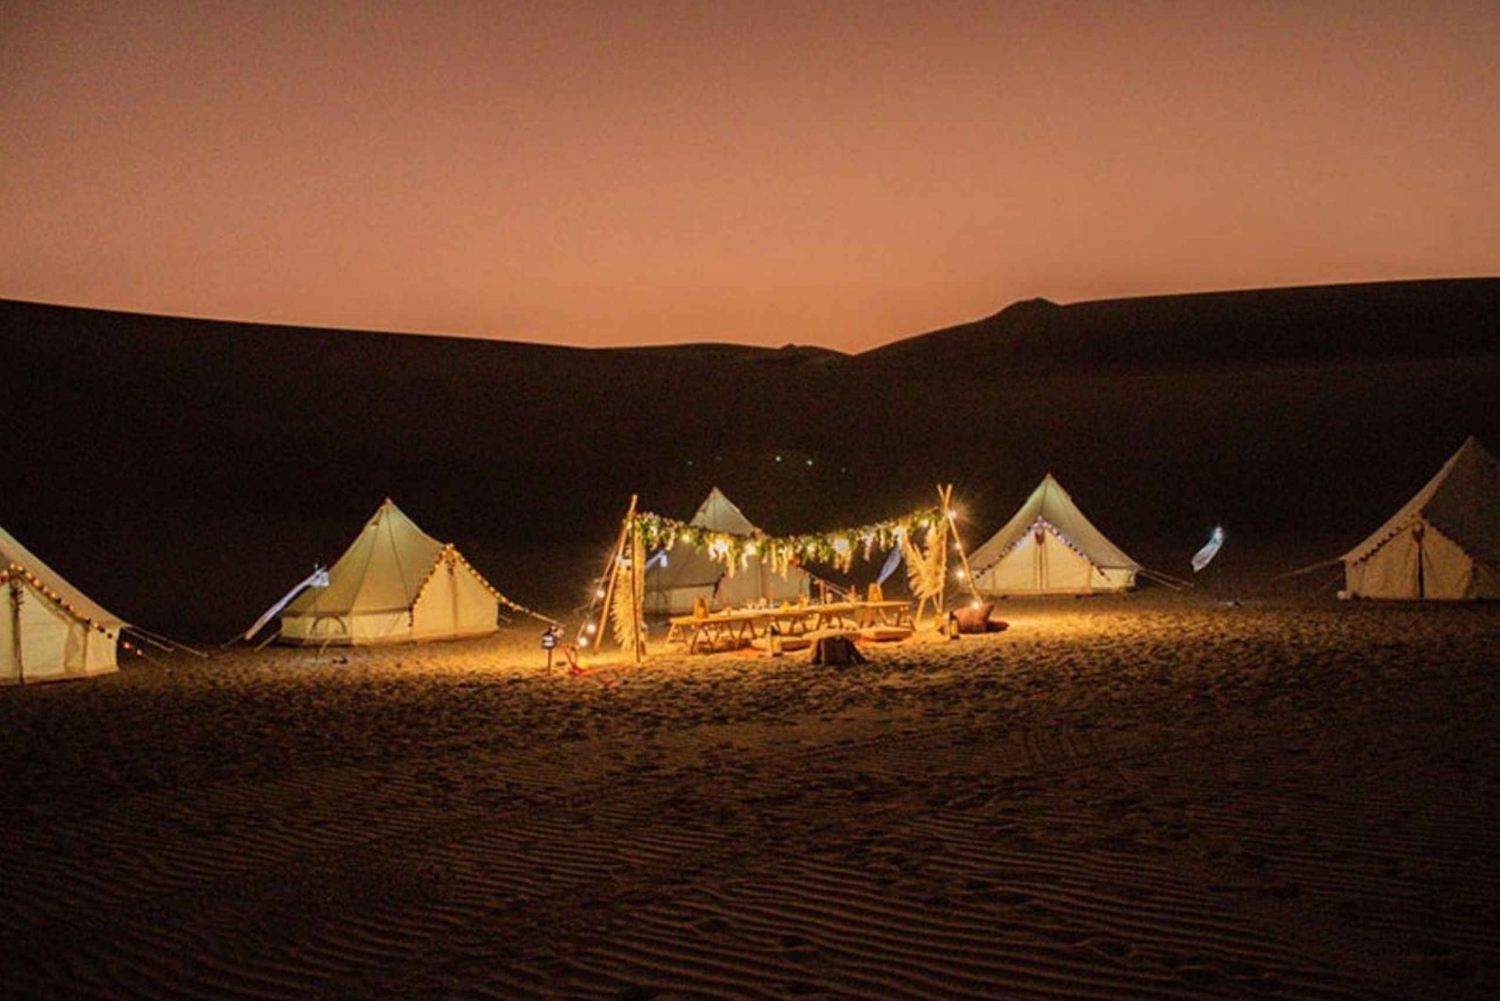 Dinner in the Desert - A Unique Culinary Experience